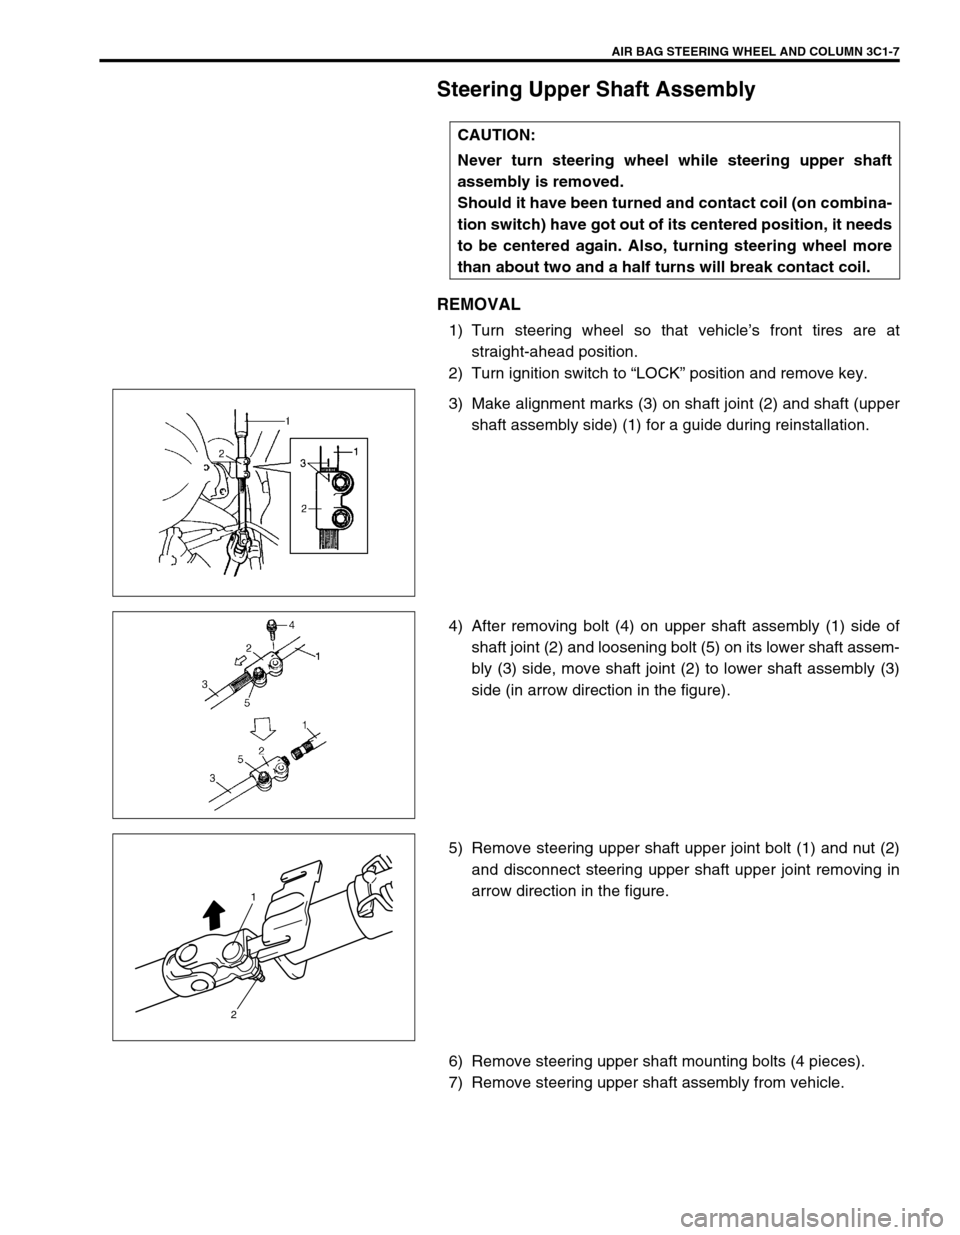 SUZUKI GRAND VITARA 2001 2.G User Guide AIR BAG STEERING WHEEL AND COLUMN 3C1-7
Steering Upper Shaft Assembly
REMOVAL
1) Turn steering wheel so that vehicle’s front tires are at
straight-ahead position.
2) Turn ignition switch to “LOCK�